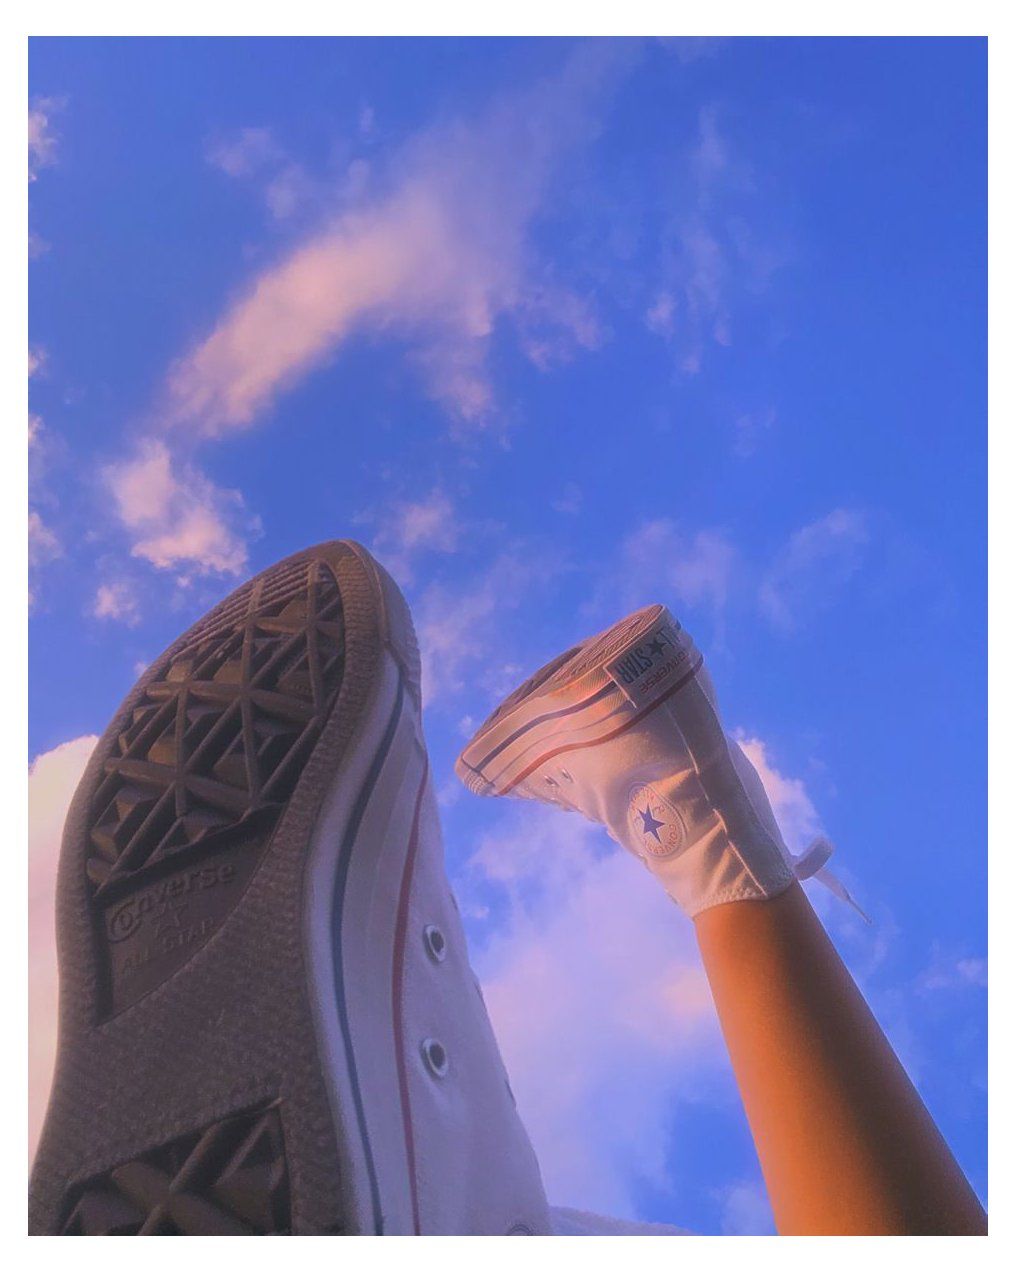 shoes #in #the #sky #aesthetic #shoesintheskyaesthetic. Shoes wallpaper, Aesthetic shoes, Converse aesthetic